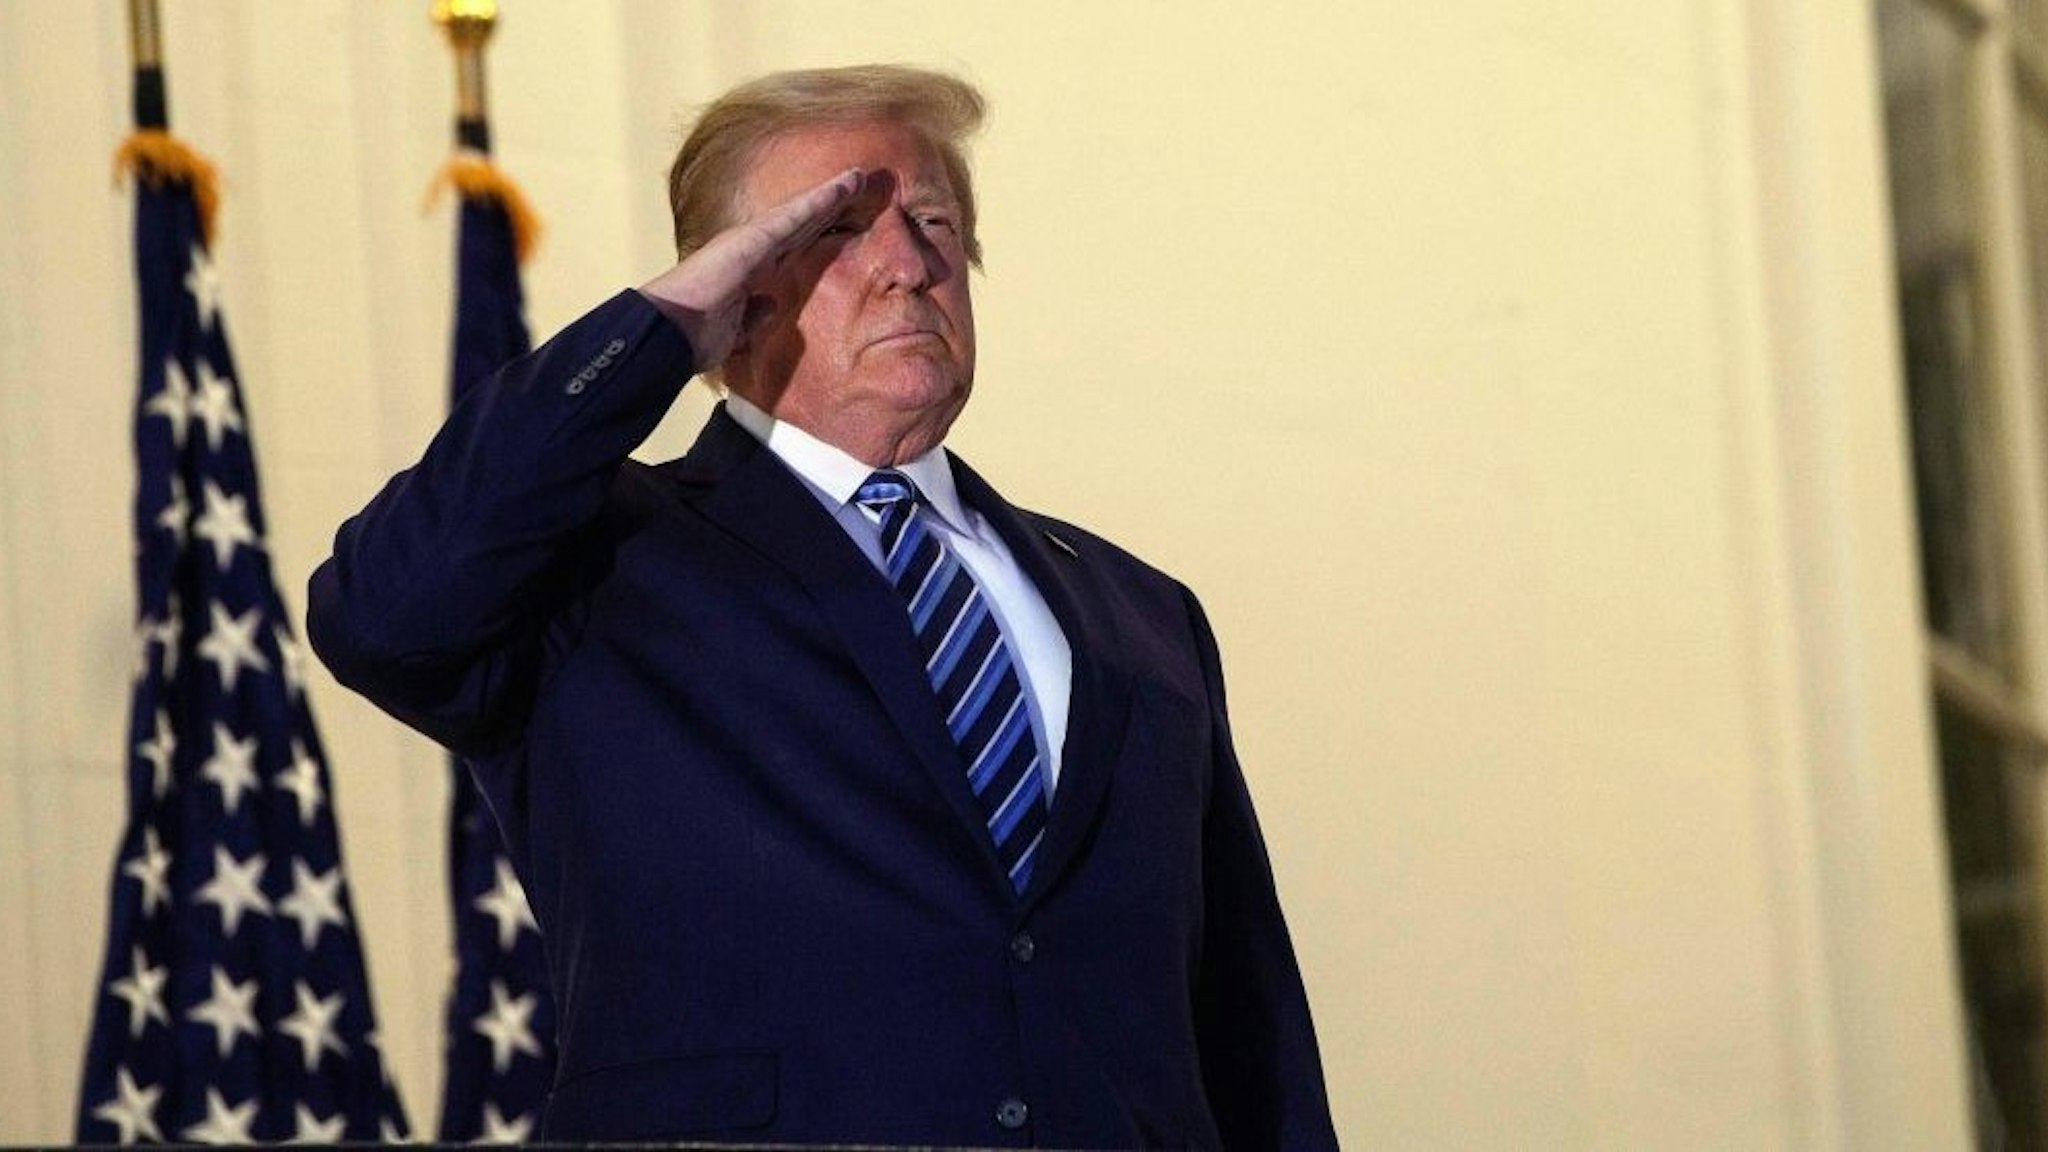 TOPSHOT - US President Donald Trump salutes from the Truman Balcony upon his return to the White House from Walter Reed Medical Center, where he underwent treatment for Covid-19, in Washington, DC, on October 5, 2020. (Photo by NICHOLAS KAMM / AFP) (Photo by